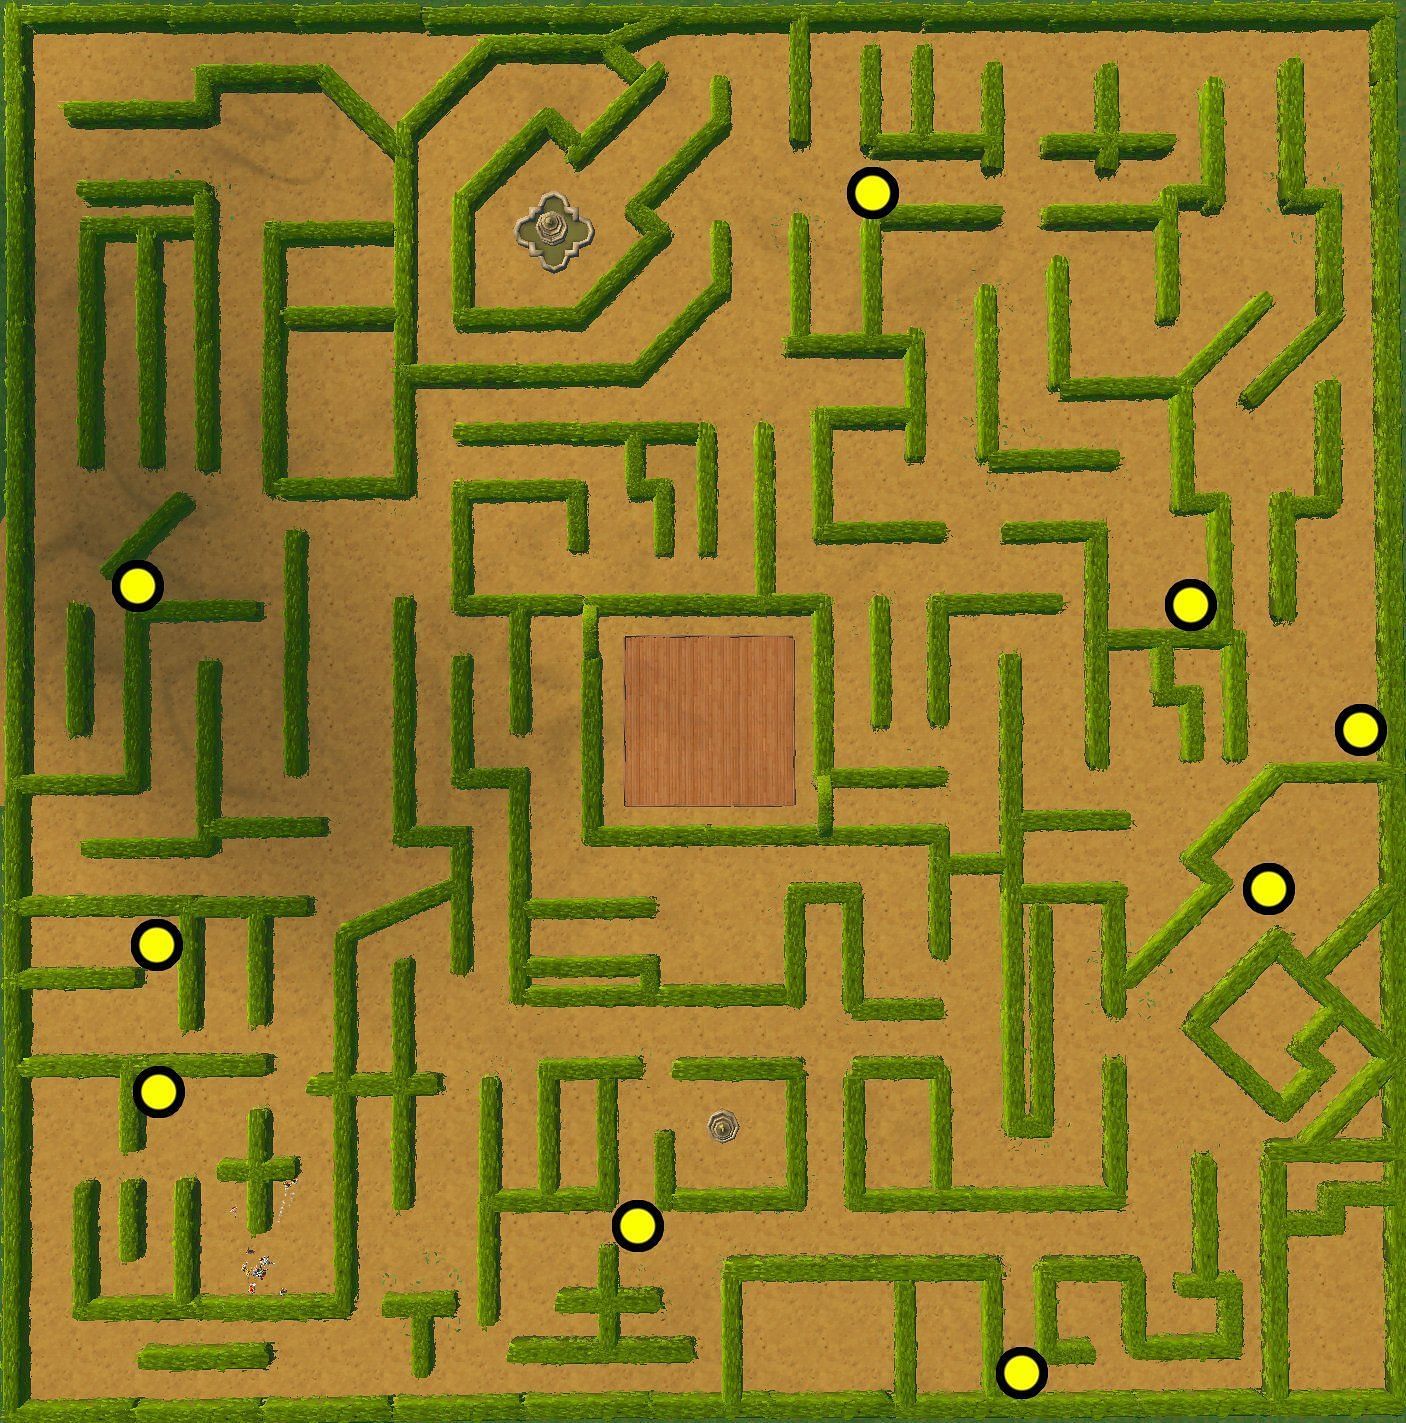 Locations of Coins on the MrBeast Maze Map (Image via FortniteDotGG/Twitter)